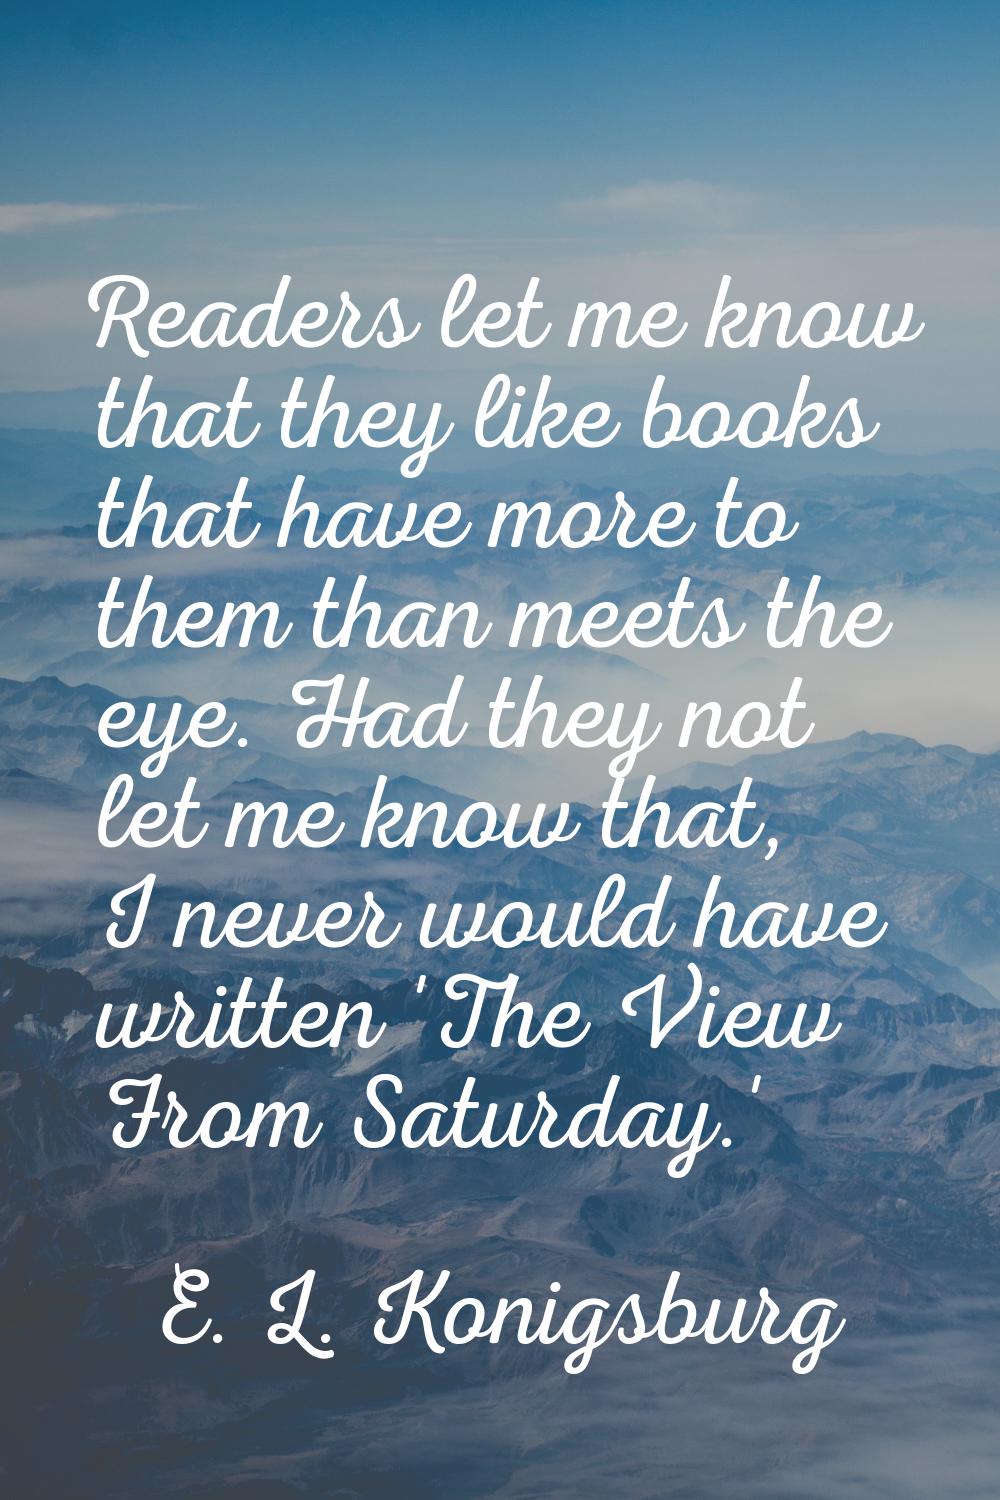 Readers let me know that they like books that have more to them than meets the eye. Had they not le